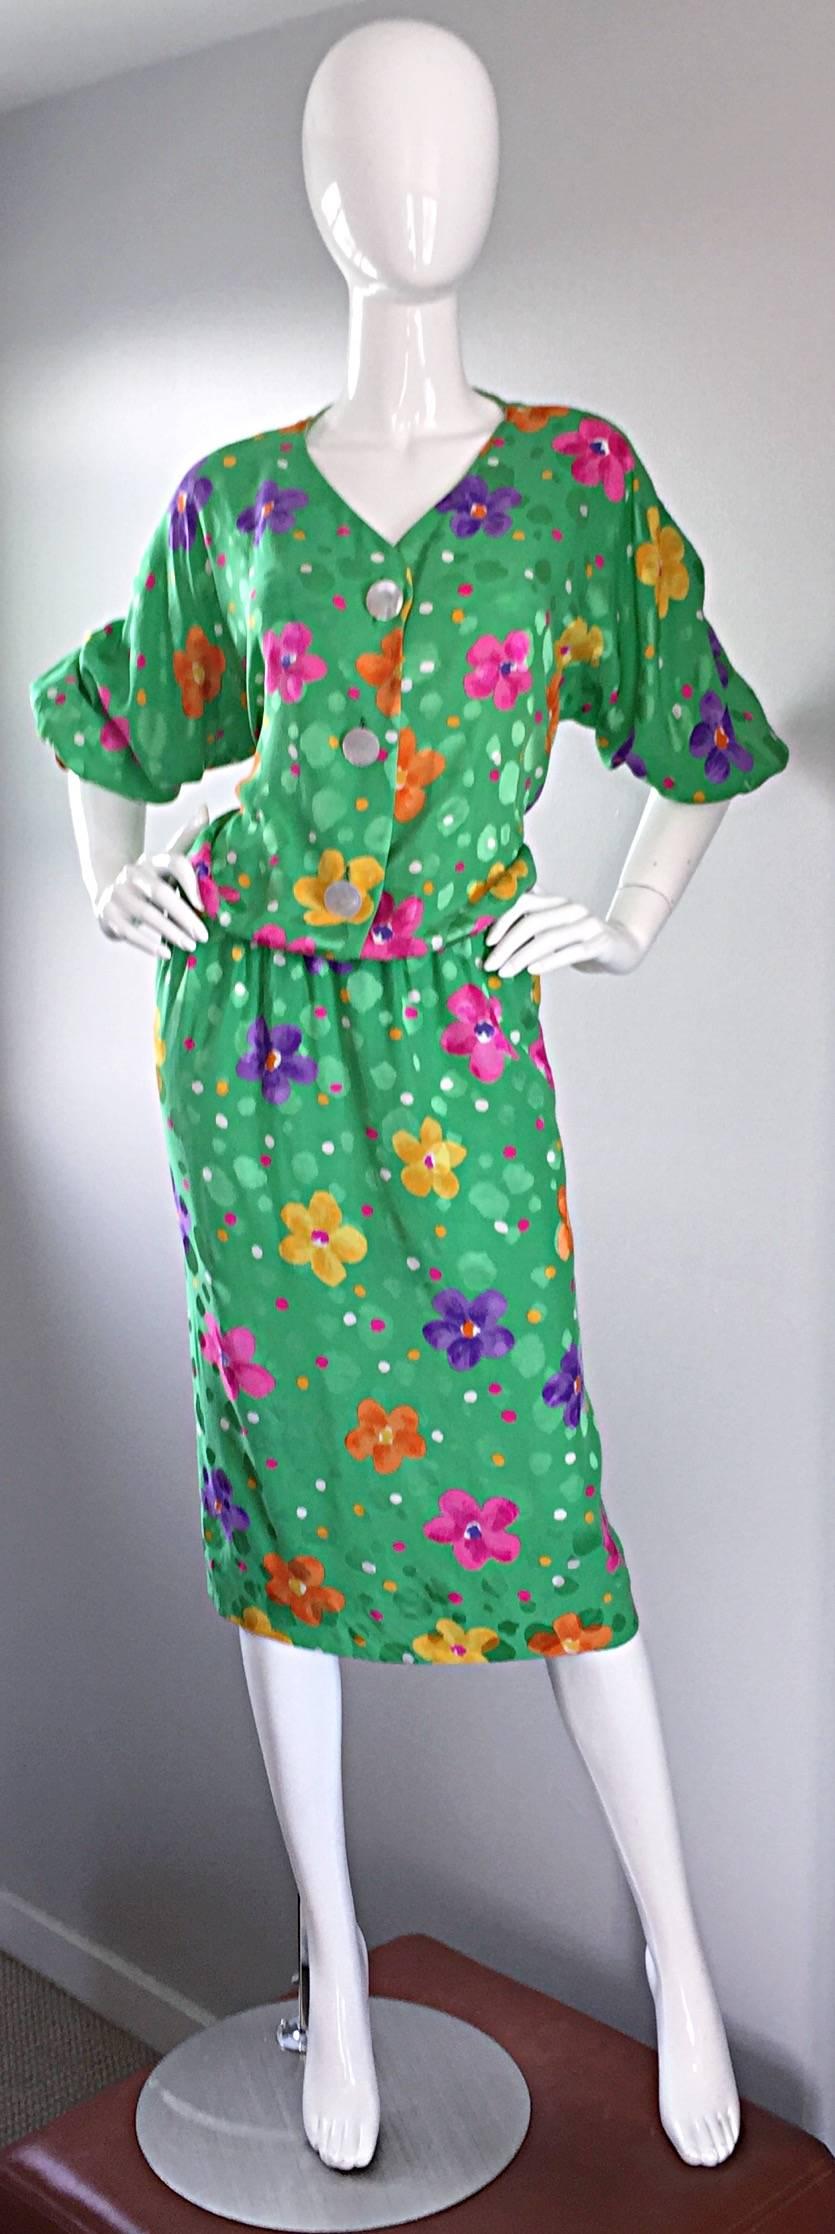 Beautiful vintage AKRIS dress! Wonderful kelly green color, with colorful flowers printed throughout. Pearlized disc buttons up the bodice, with hidden snap closure at neck. Sleeves can be left down, or rolled up. 100% Silk. In great condition. Made